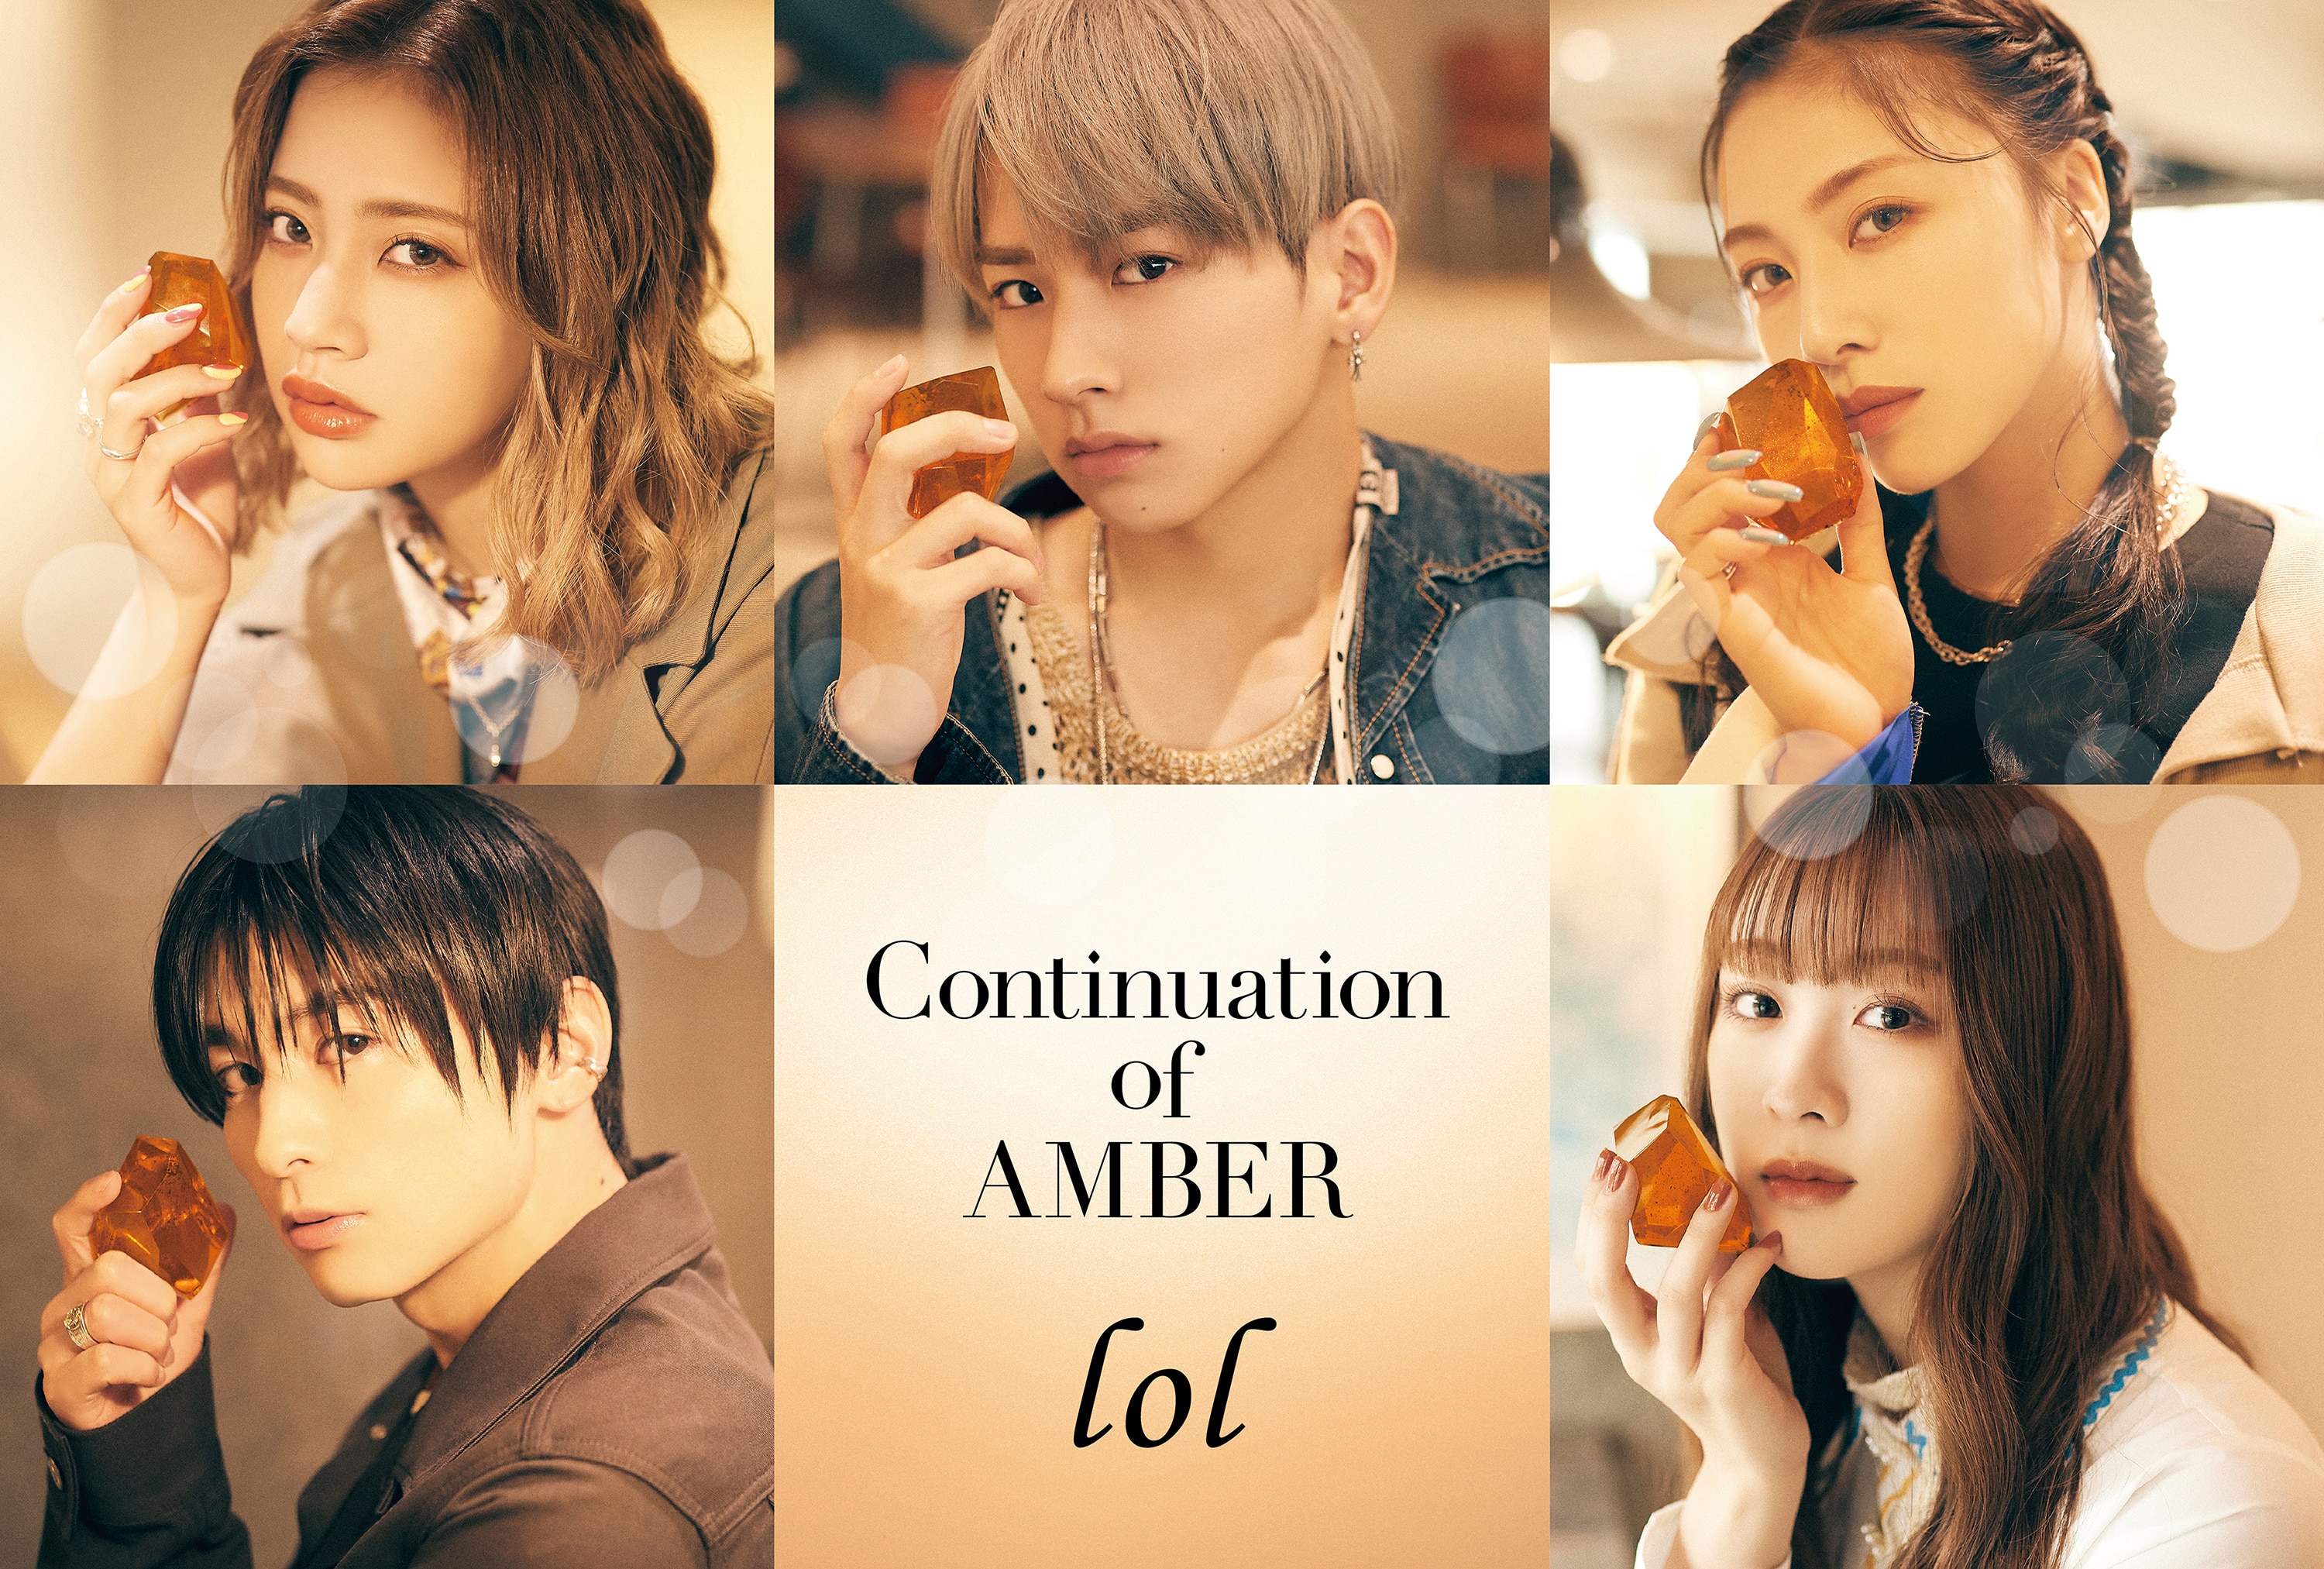 「Continuation of AMBER」